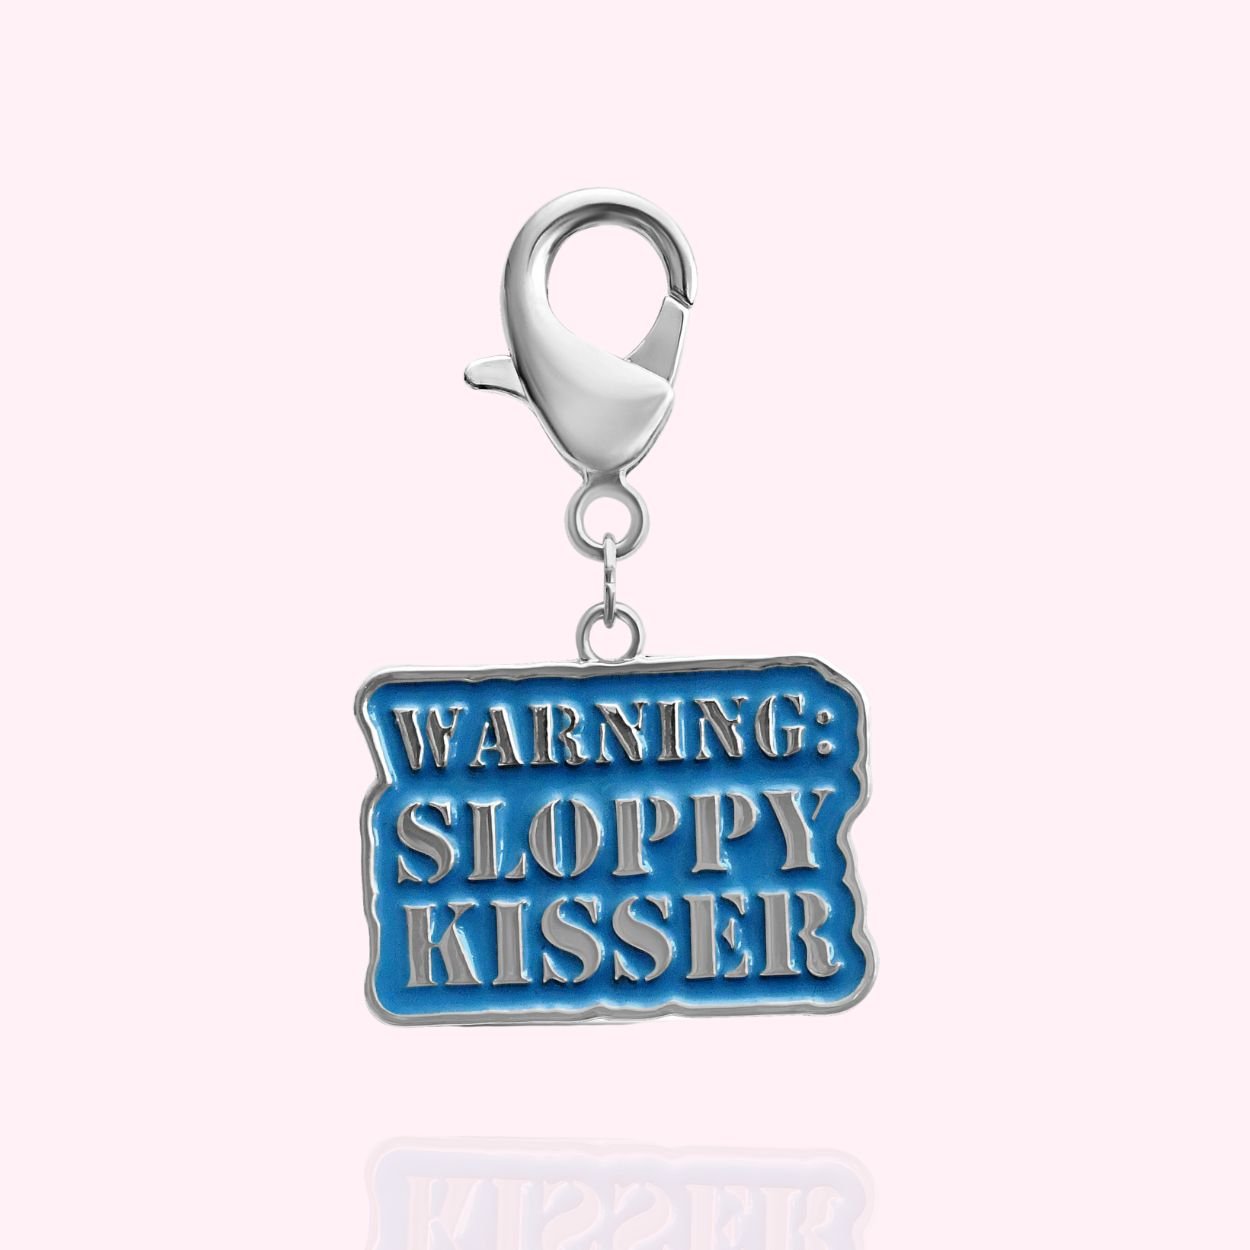 "Warning: Sloppy Kisser" Dog Collar Charm - Silver - Doggy Style Pet Products